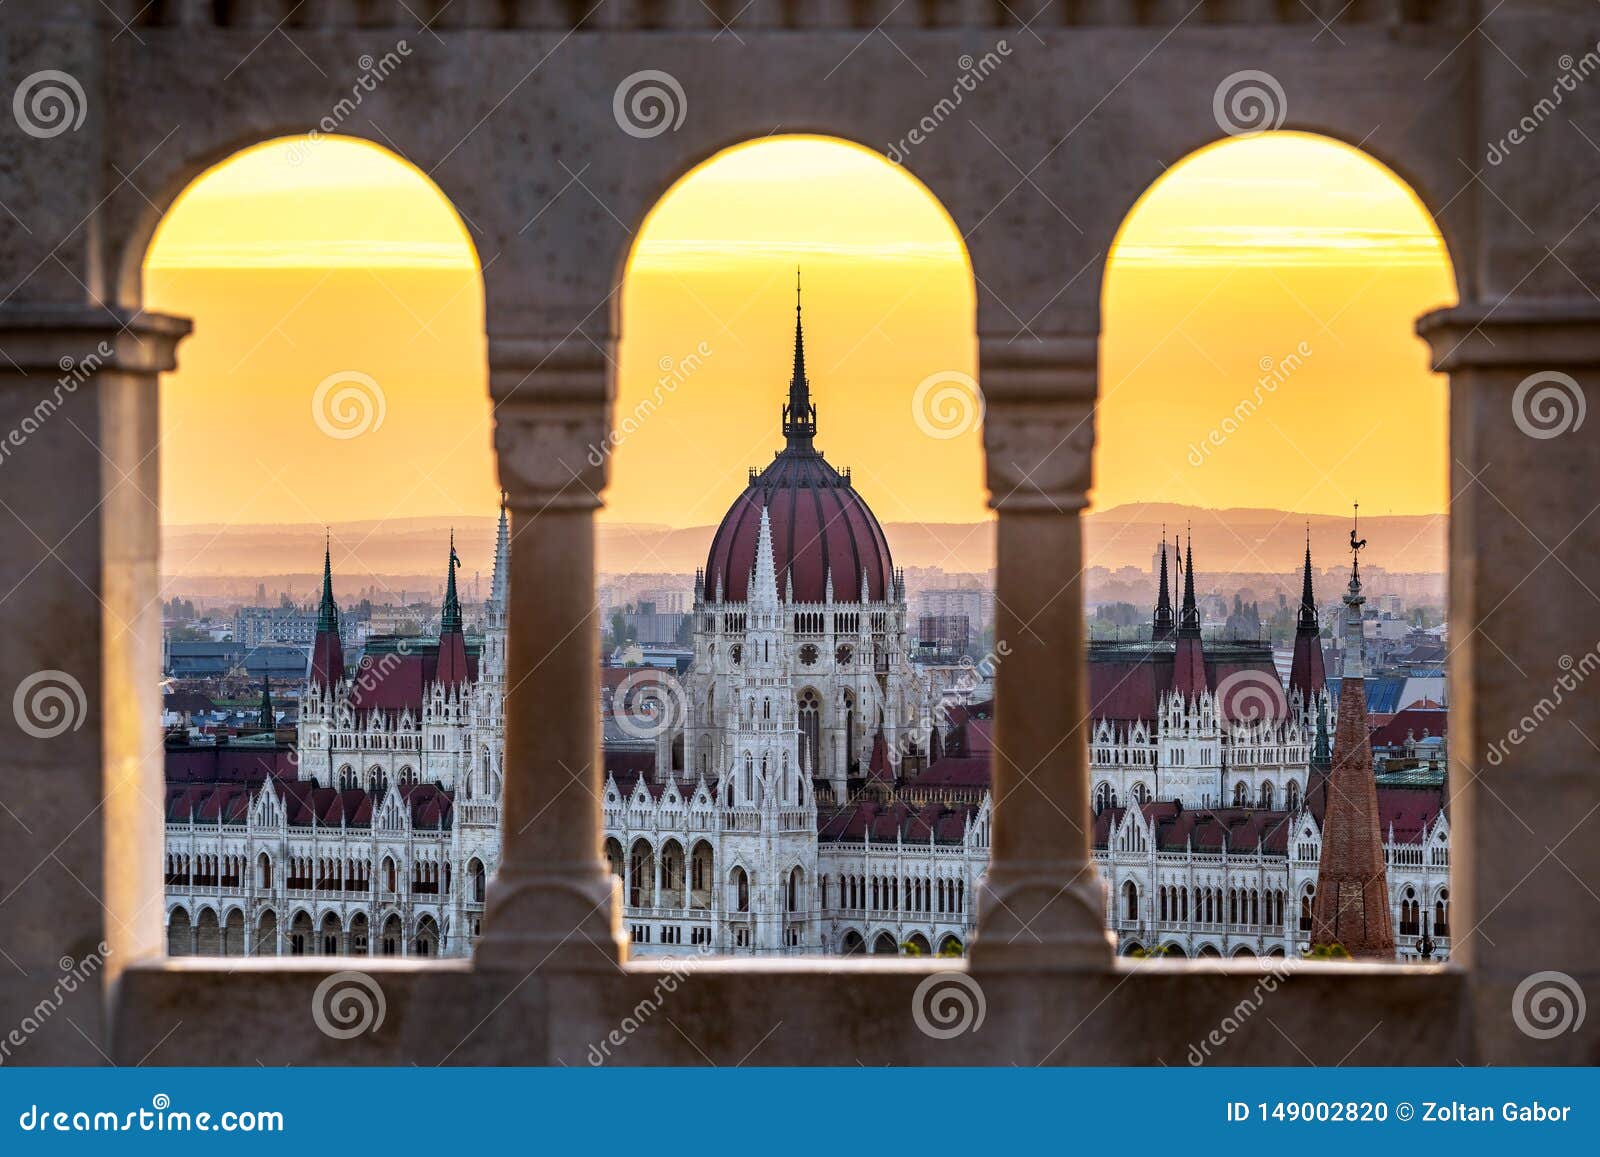 budapest, hungary - the hungarian parliament building at sunrise looking through old stone windows